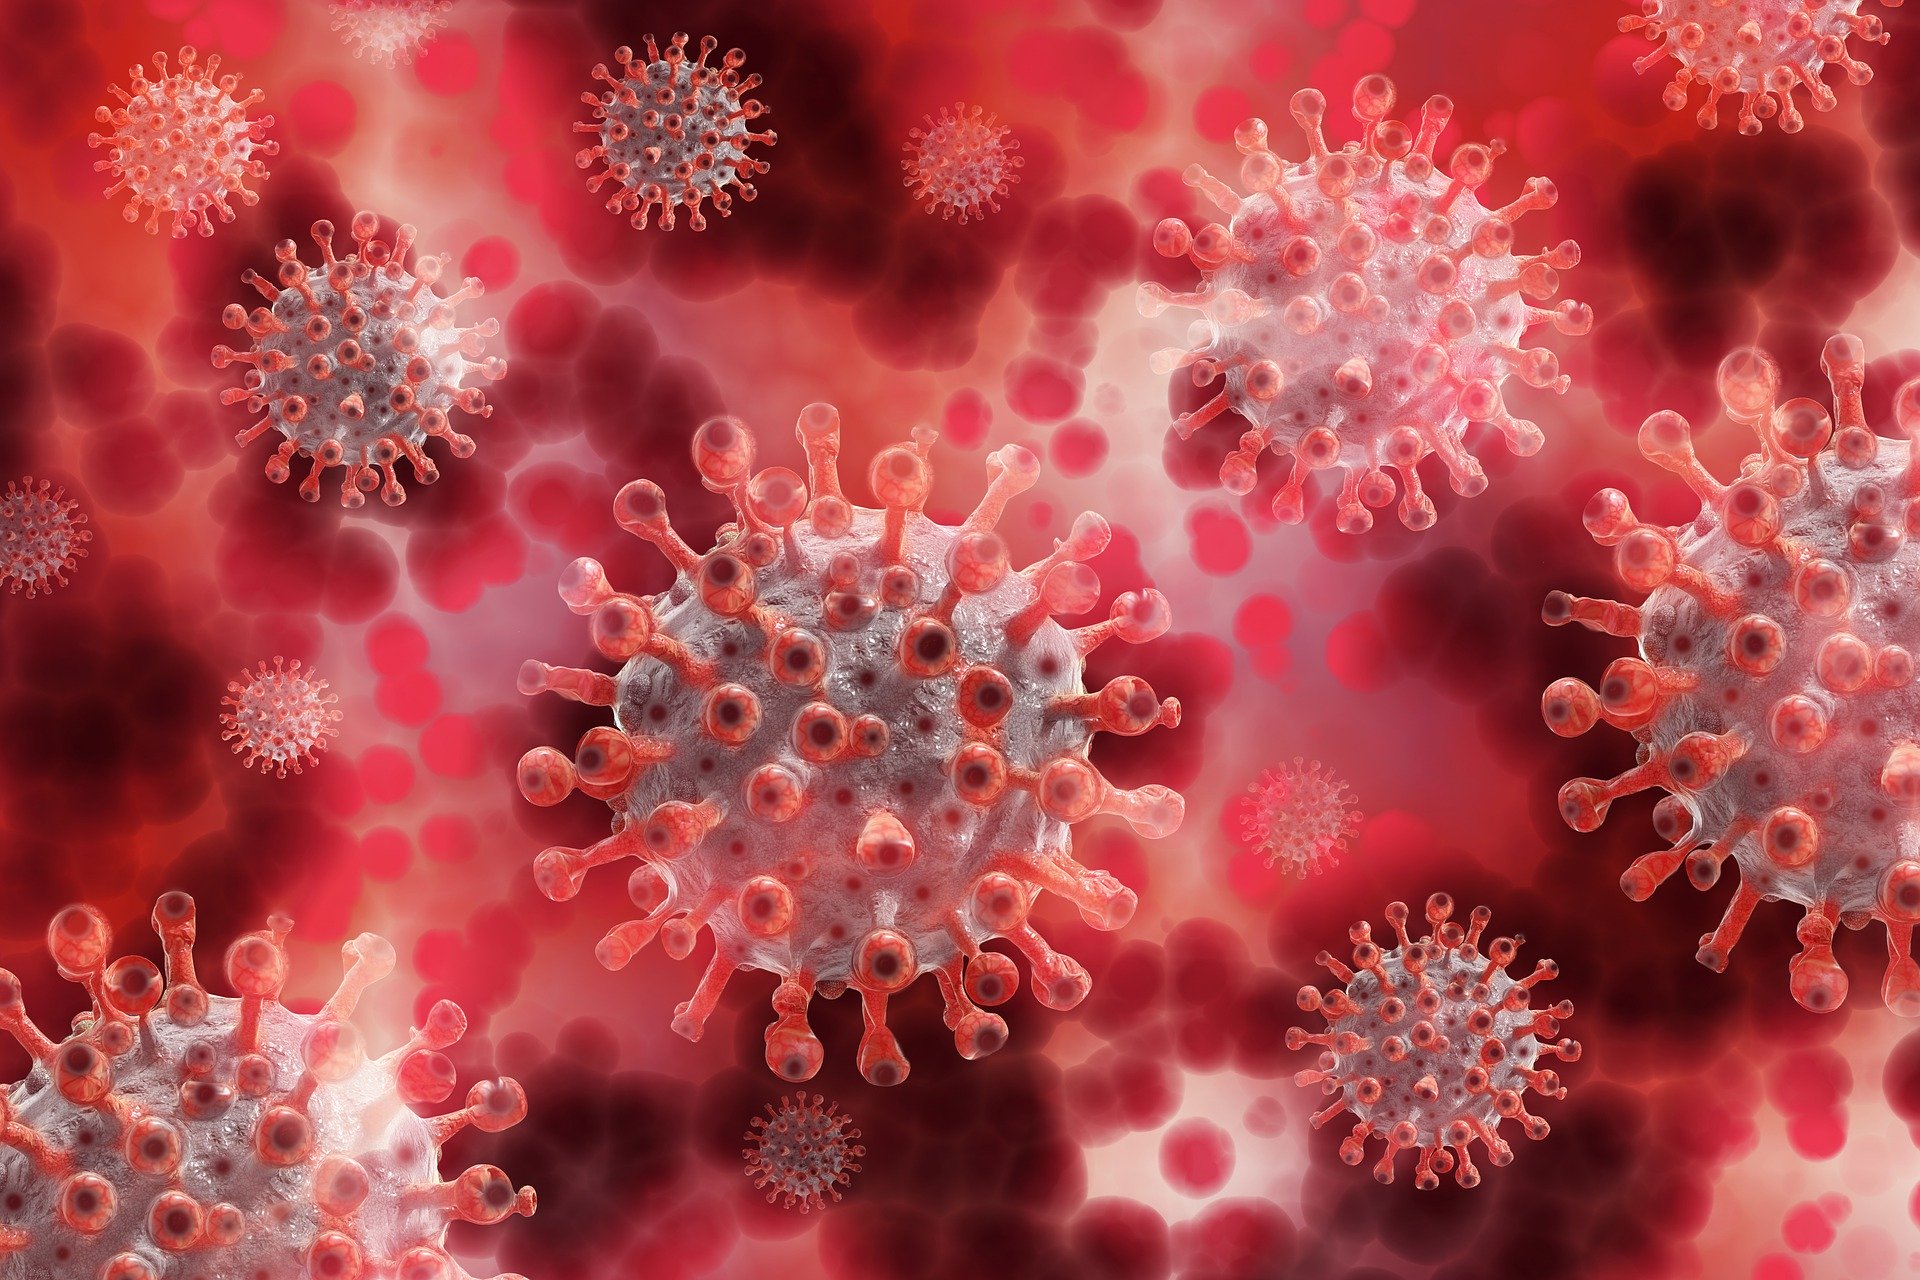 How To Safely Clean Your Car During The Coronavirus Pandemic